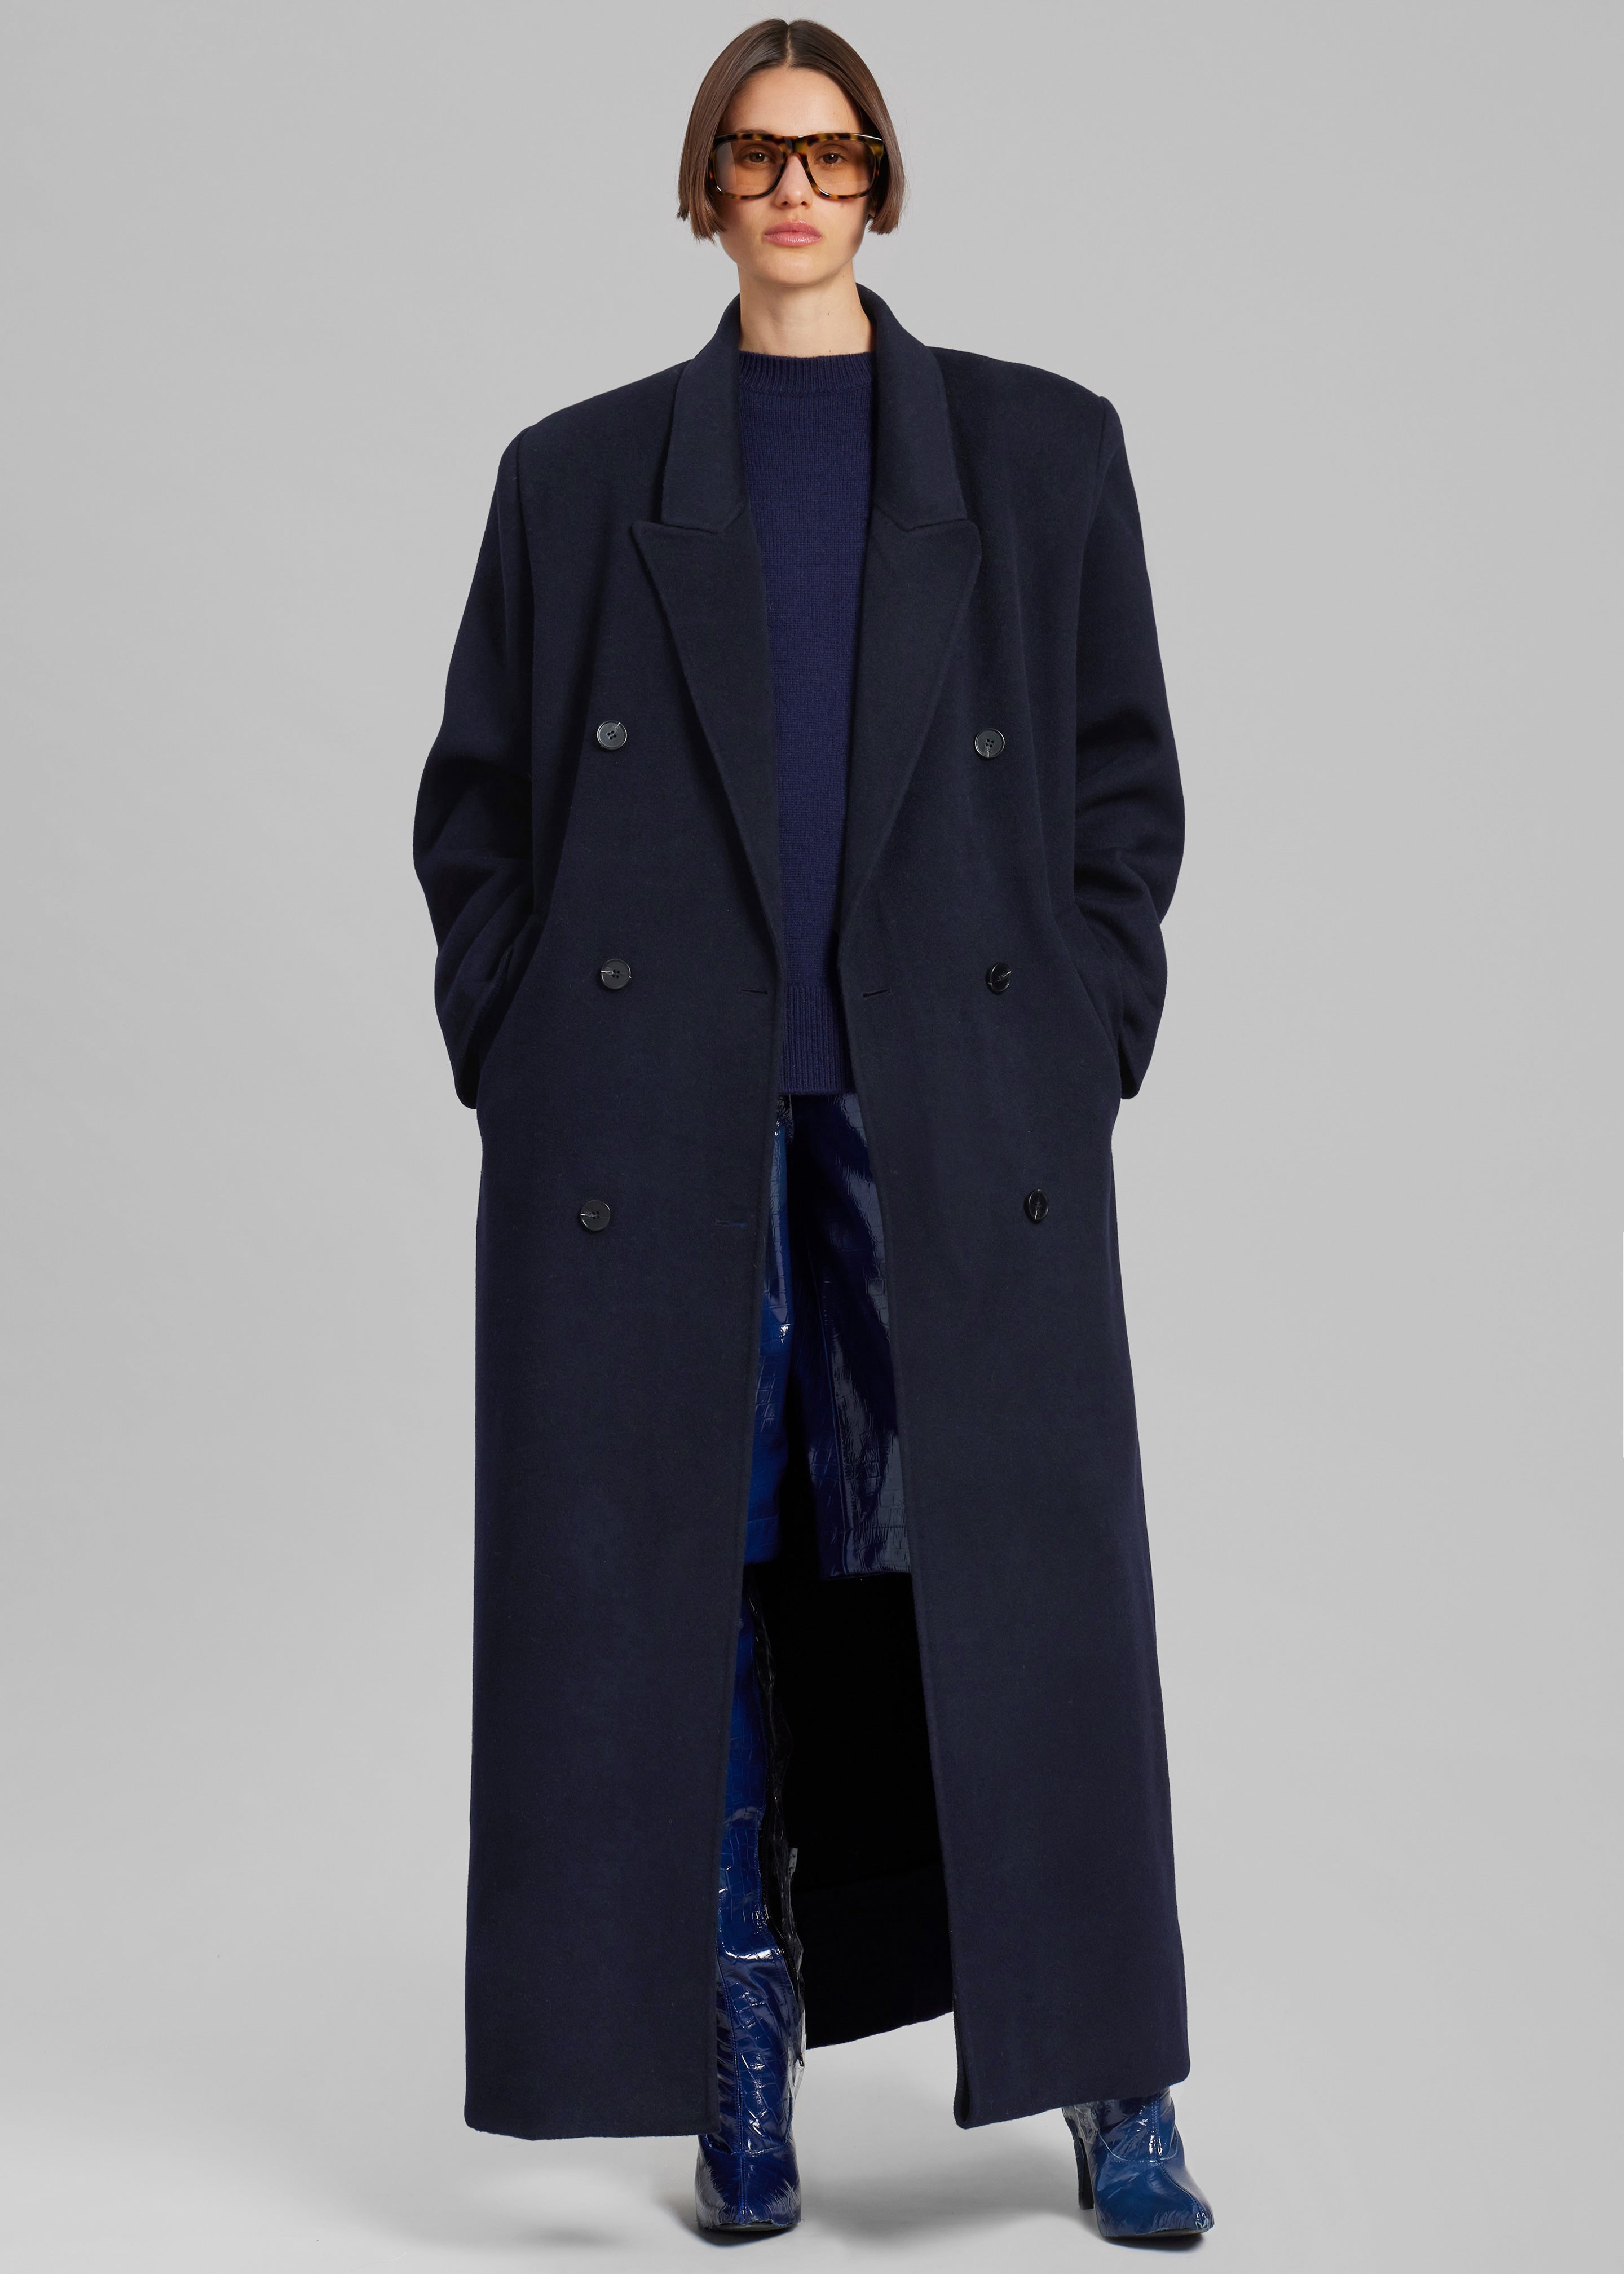 Double-breasted wool coat, navy